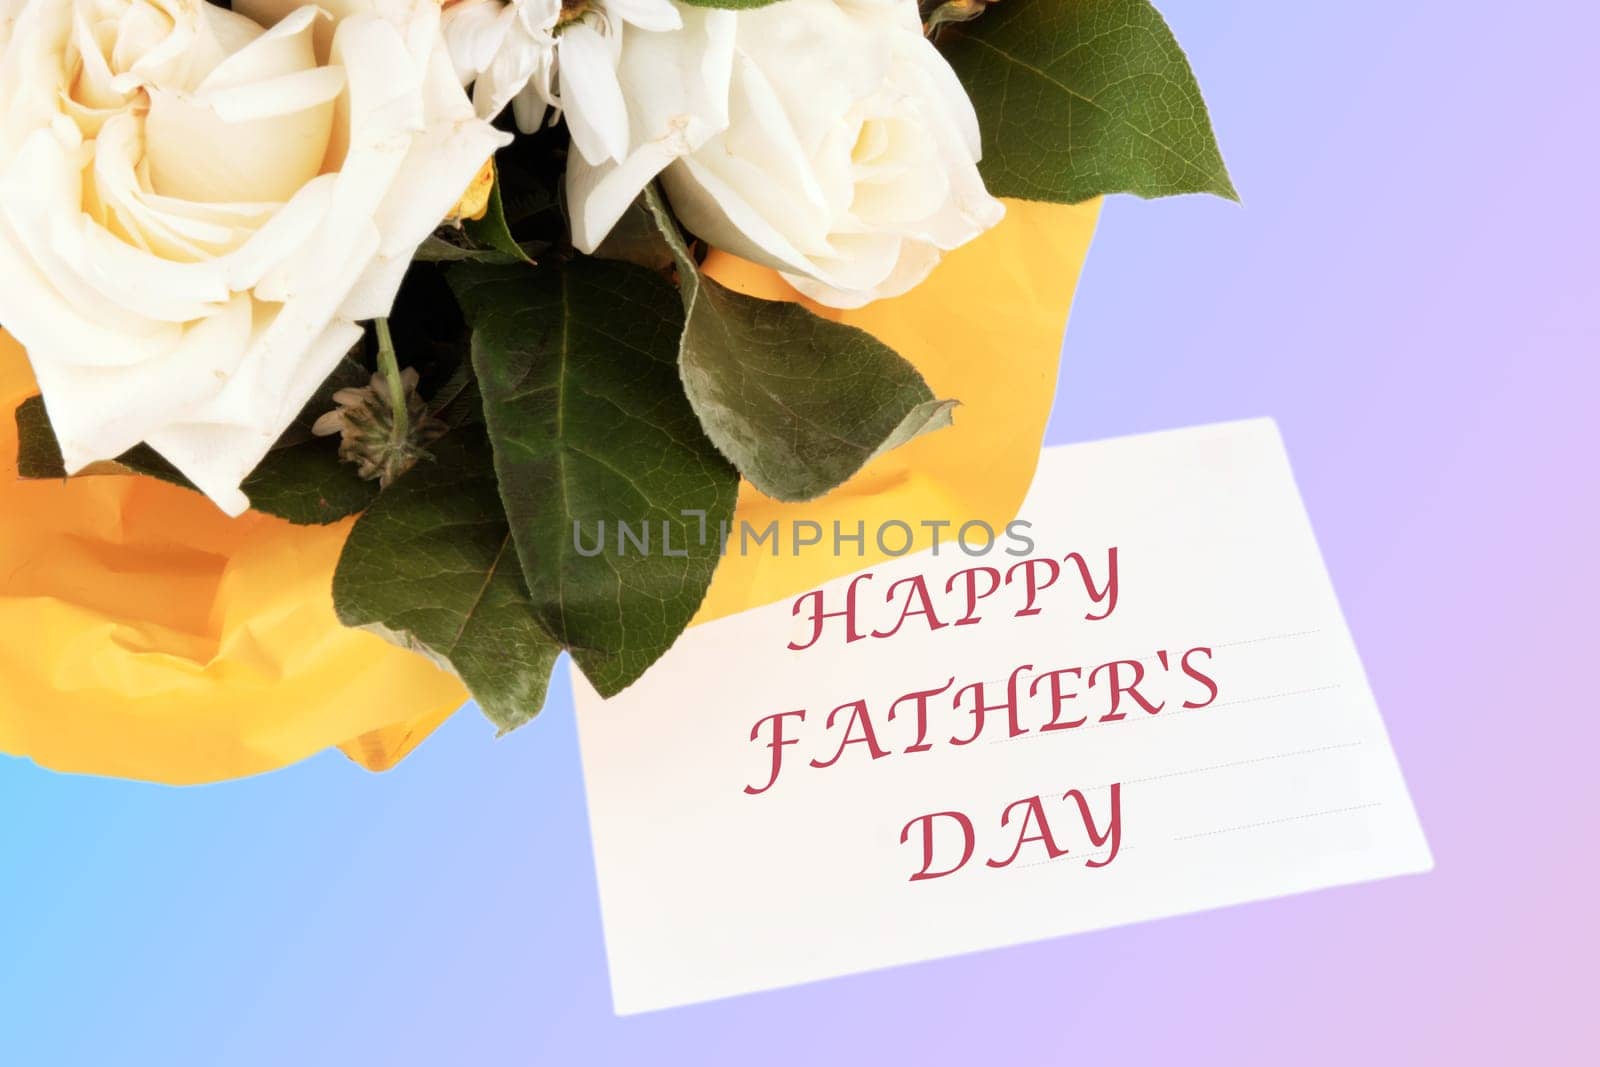 HAPPY FATHER'S DAY text on the card near the bouquet of flowers by Ihar